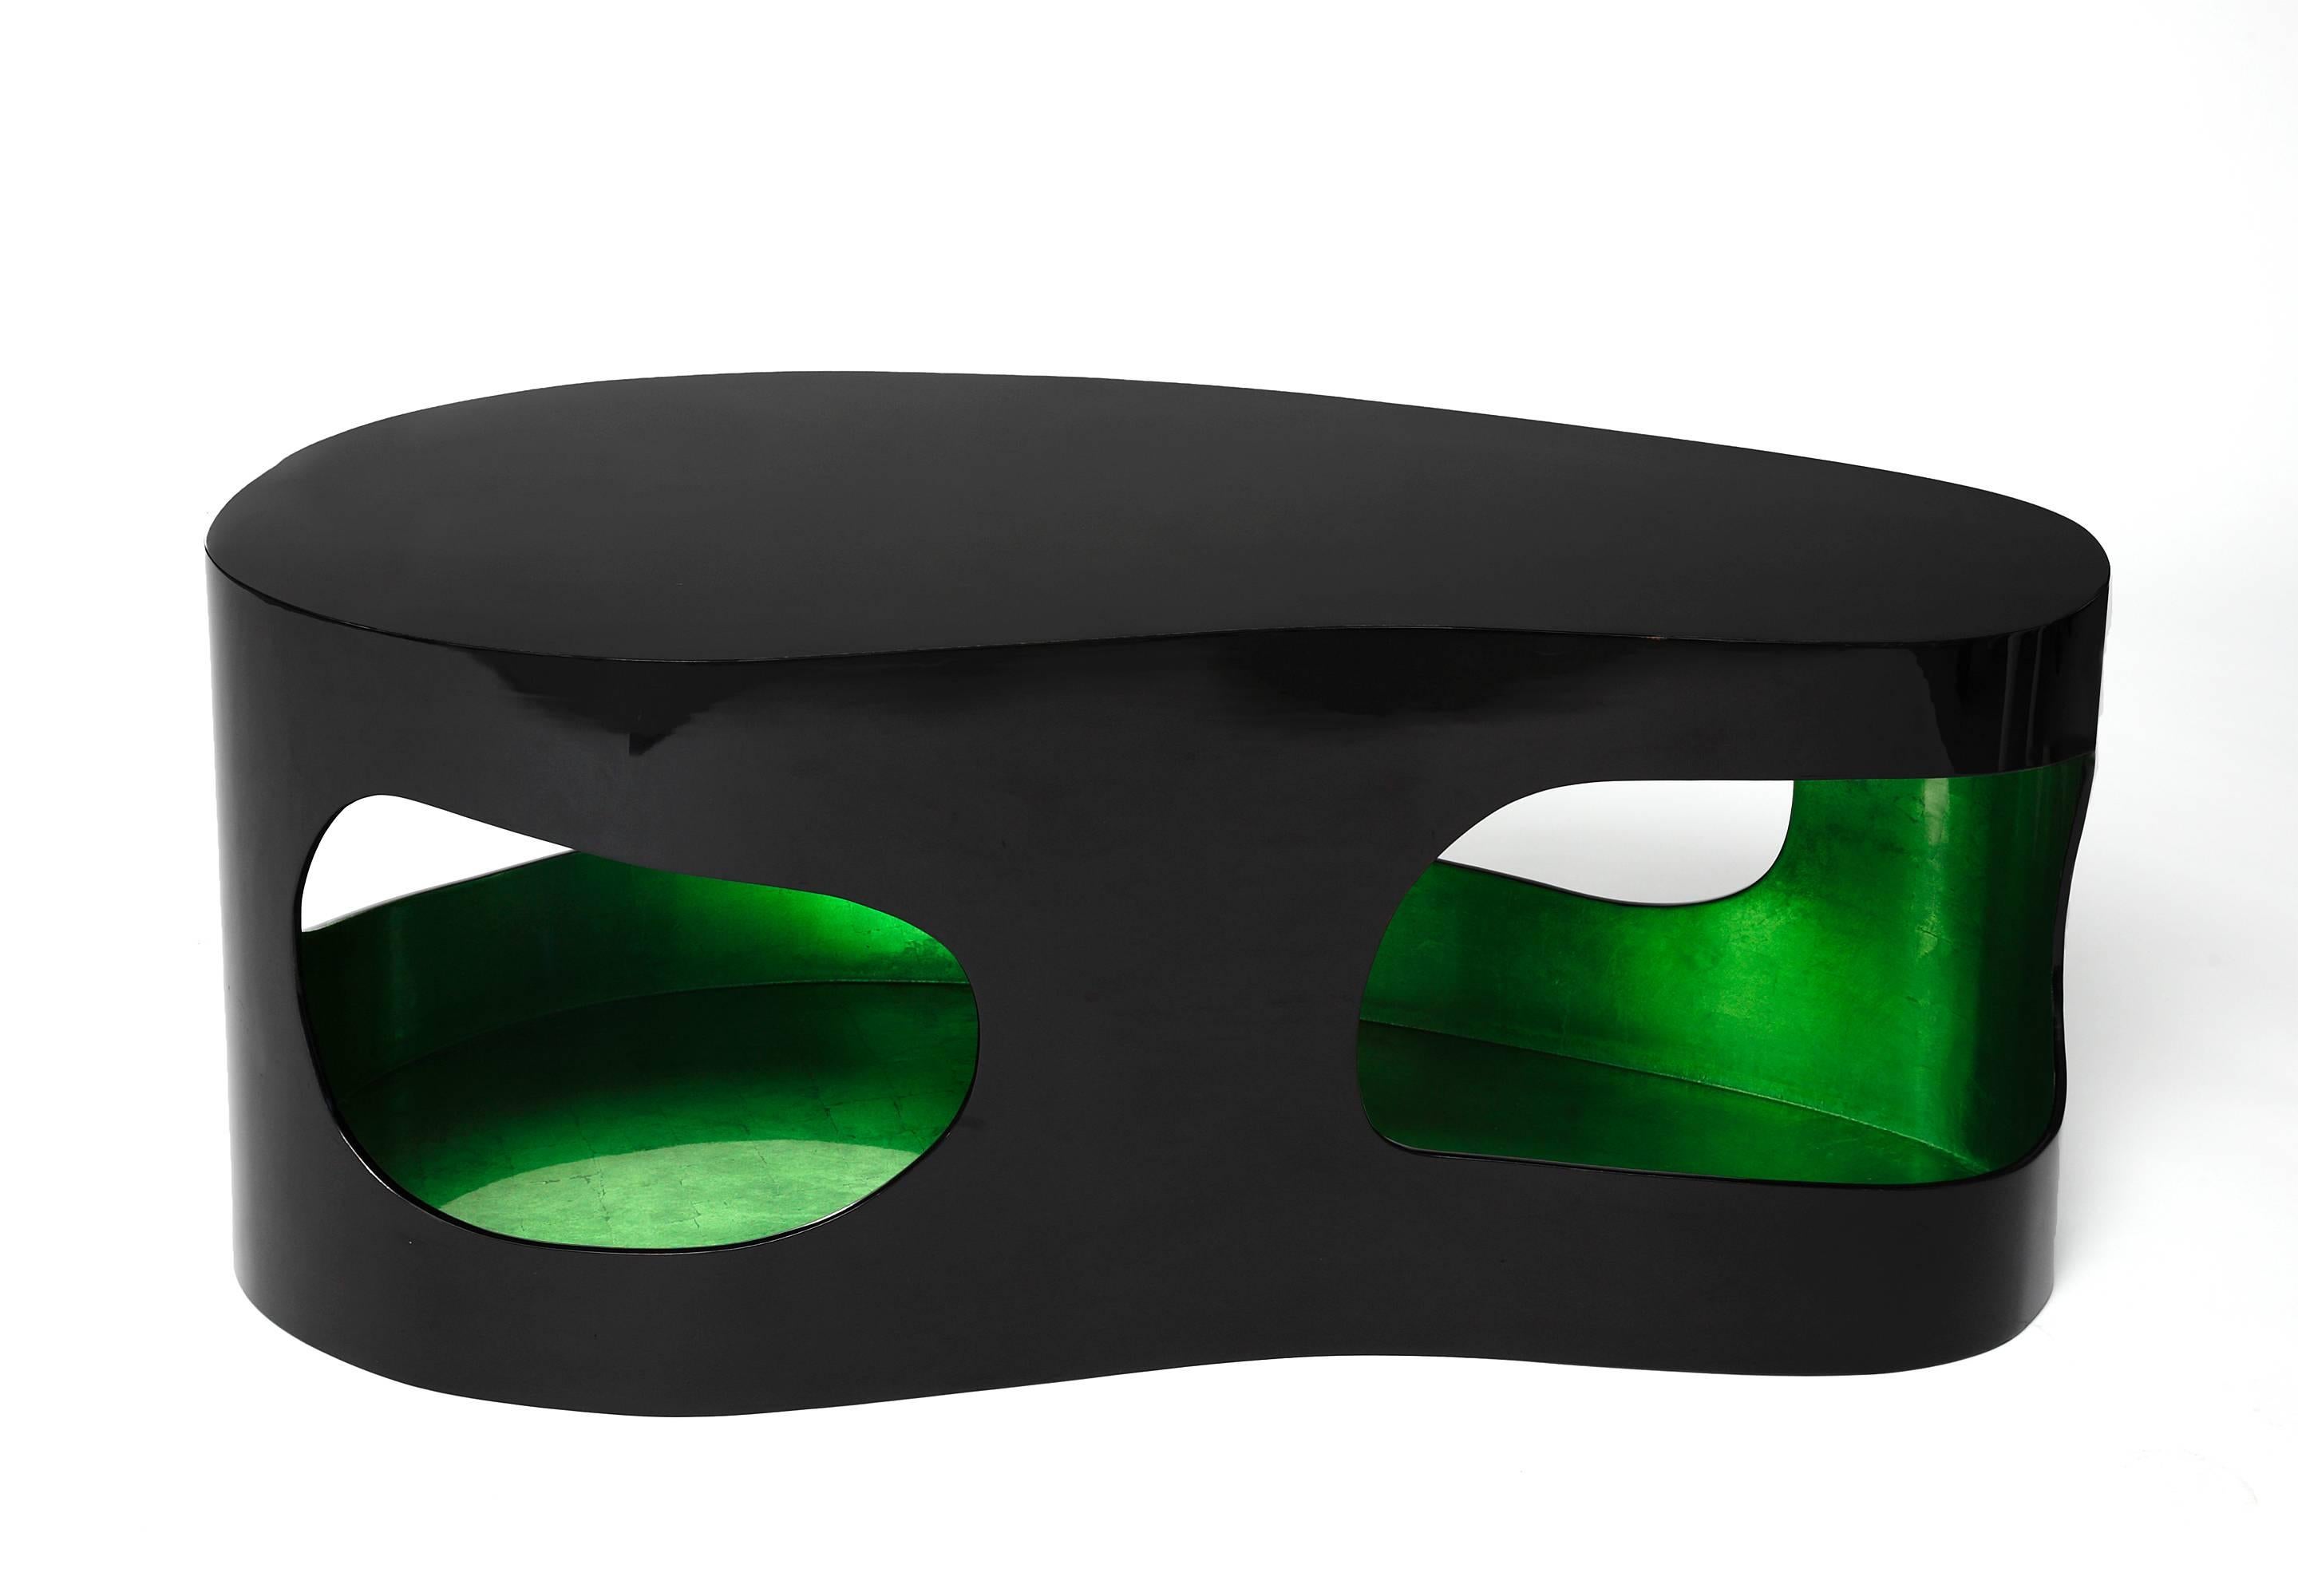 A pair of large coffee tables sculpted by Jacques Jarrige finished and in high end black lacquer on the inside and green over silver leaf on the inside.
Jarrige's signature undulating line is enhanced by the stunning precious finish.

Together with